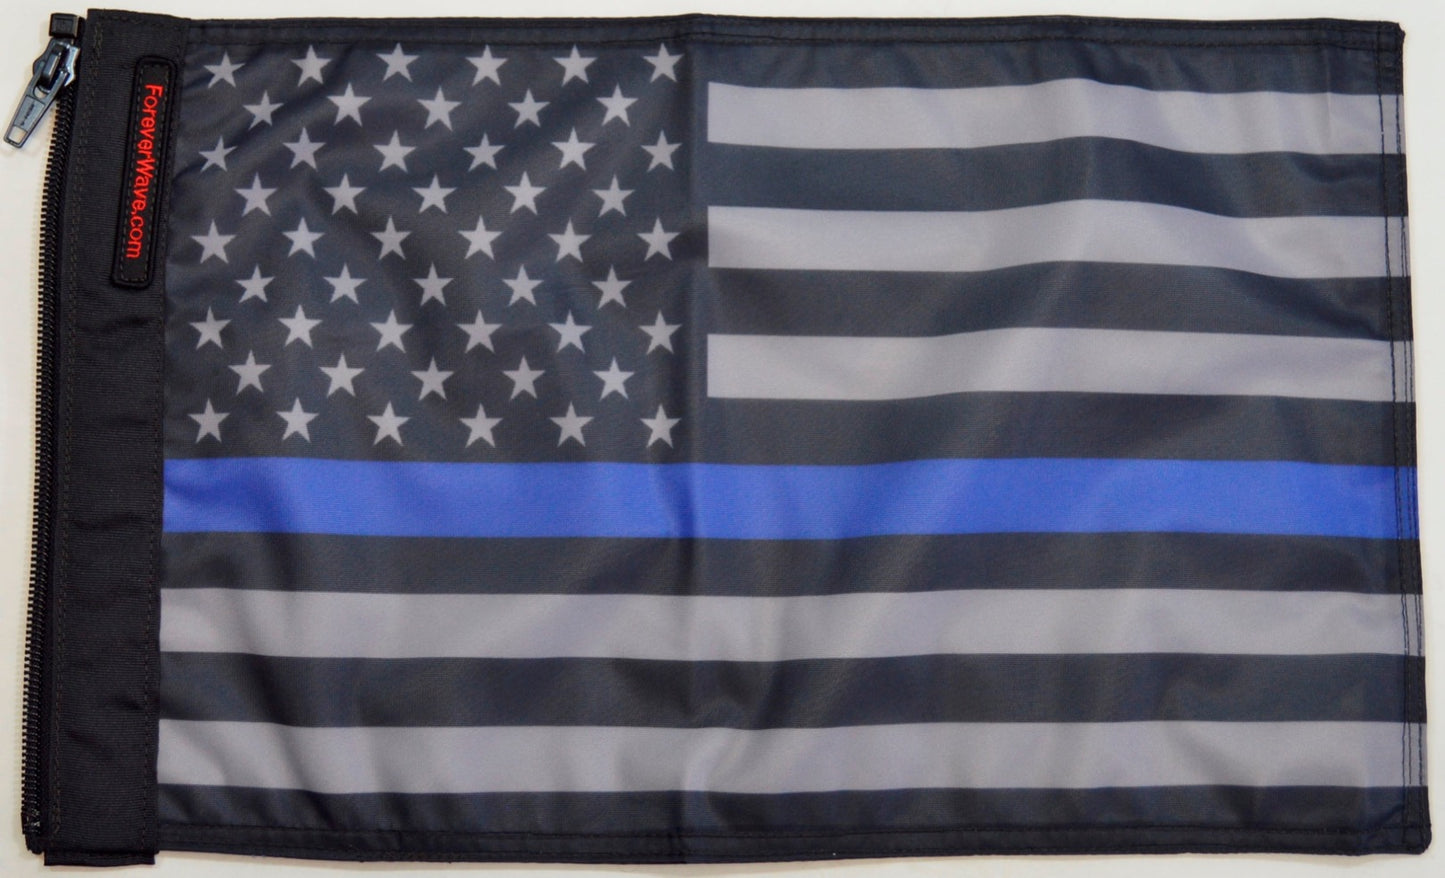 USA Subdued Thin Blue Line Flag Forever Wave 12”x18”